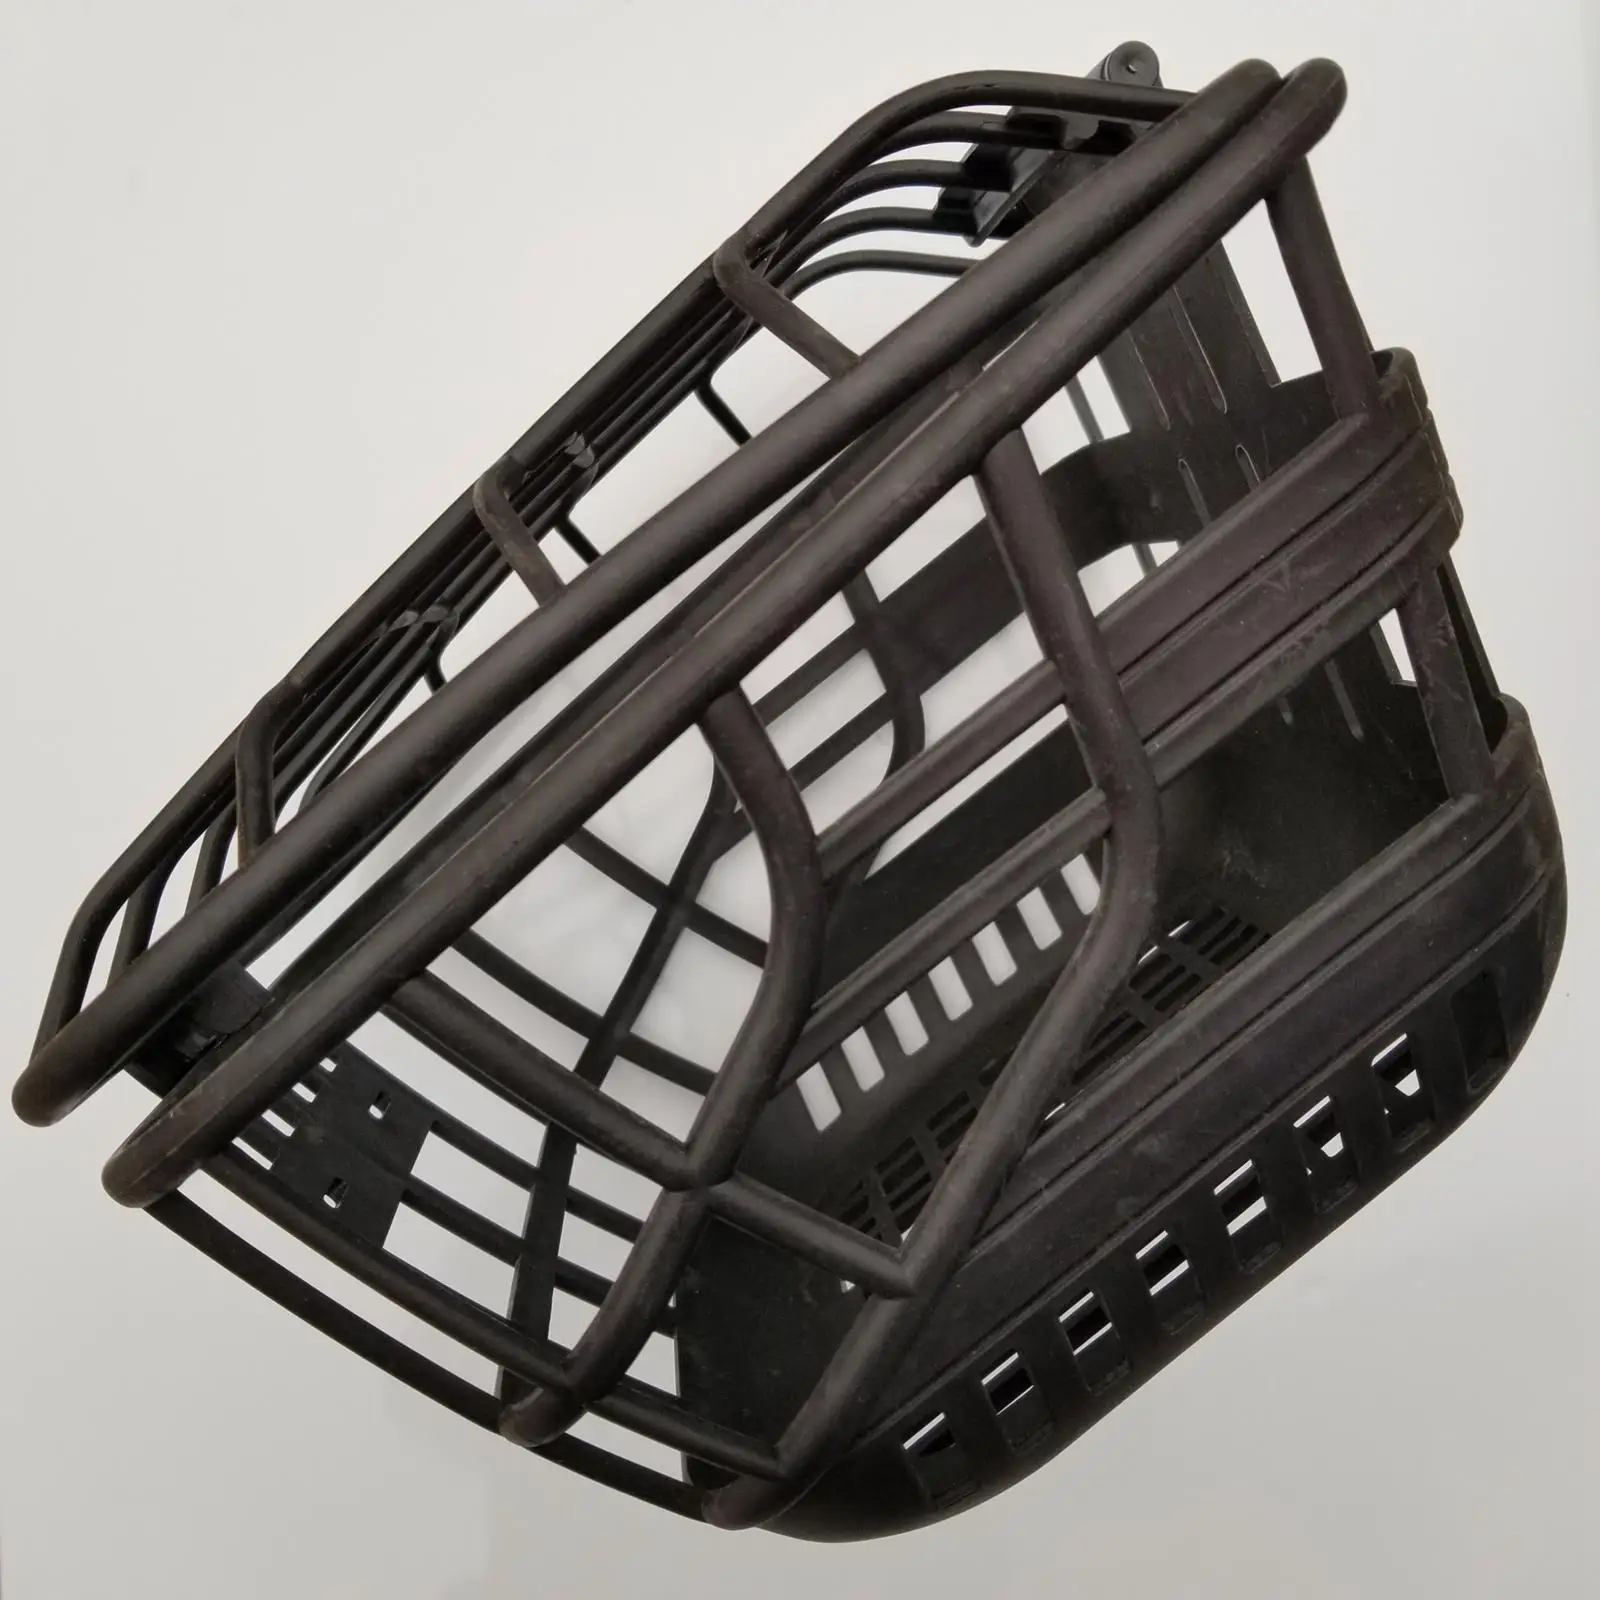 Bicycle Basket With Cover Removable Bike Handlebar Front Basket Bicycle Rack Hanging Basket Cycling Cargo Carrier